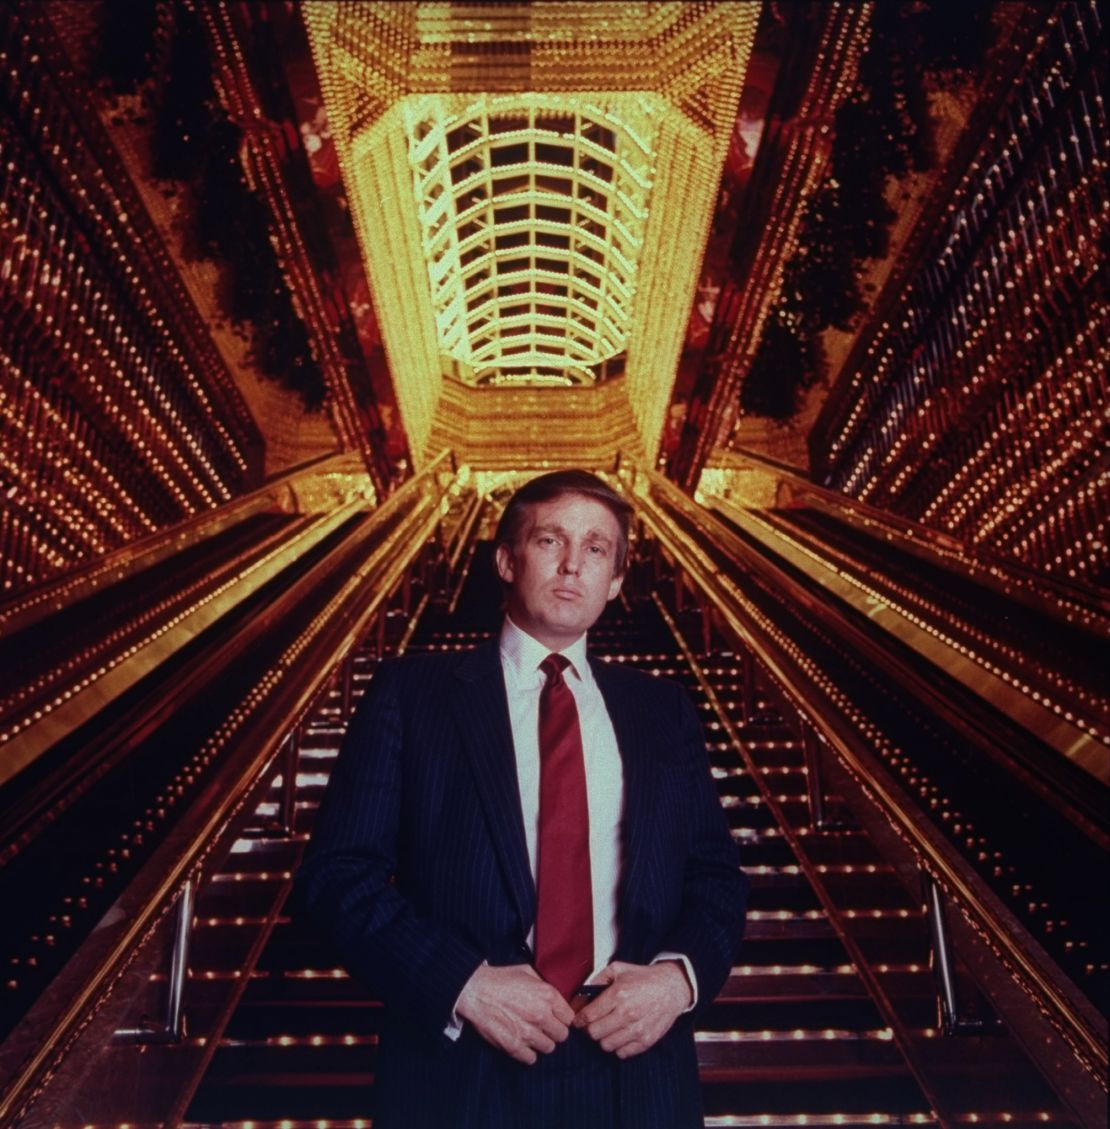 Donald Trump in 1989. At that time, he was inveighing against Japan for taking advantage of the US on trade. 